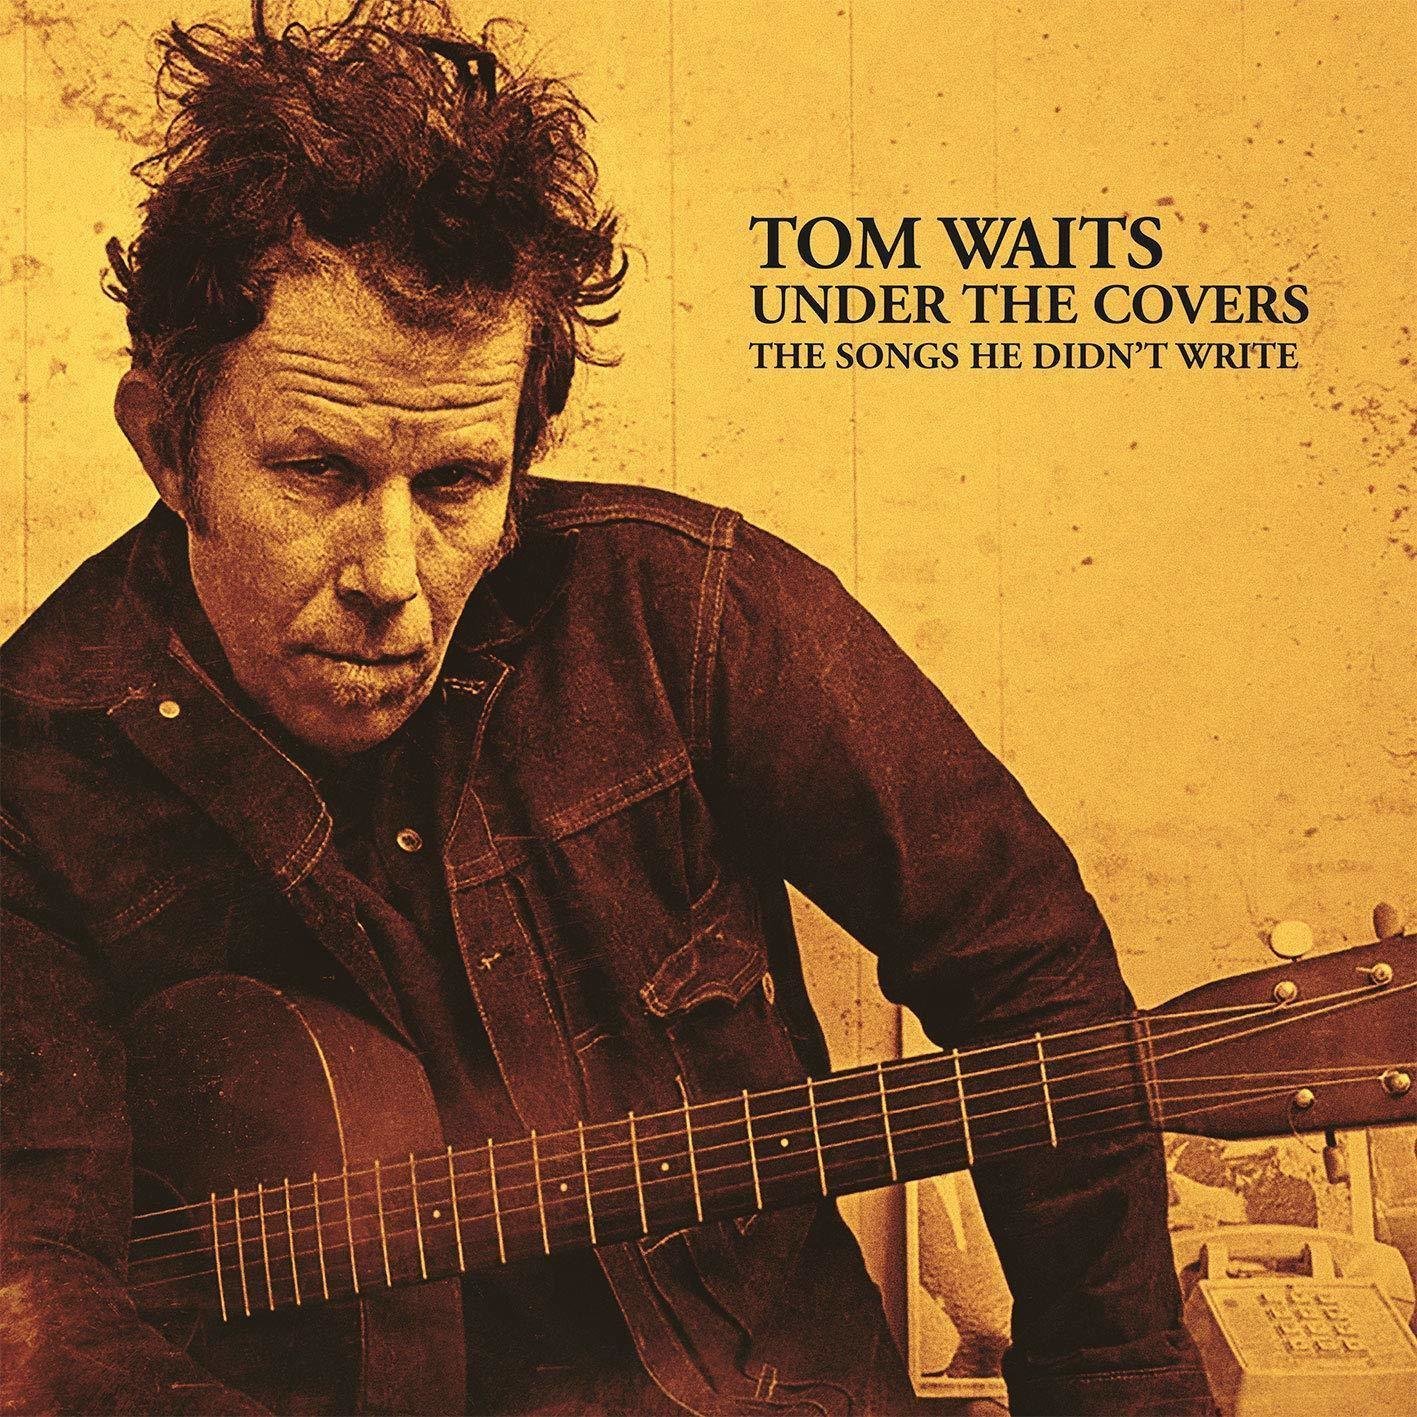 Vinyl Record Tom Waits - Under The Covers (2 LP)